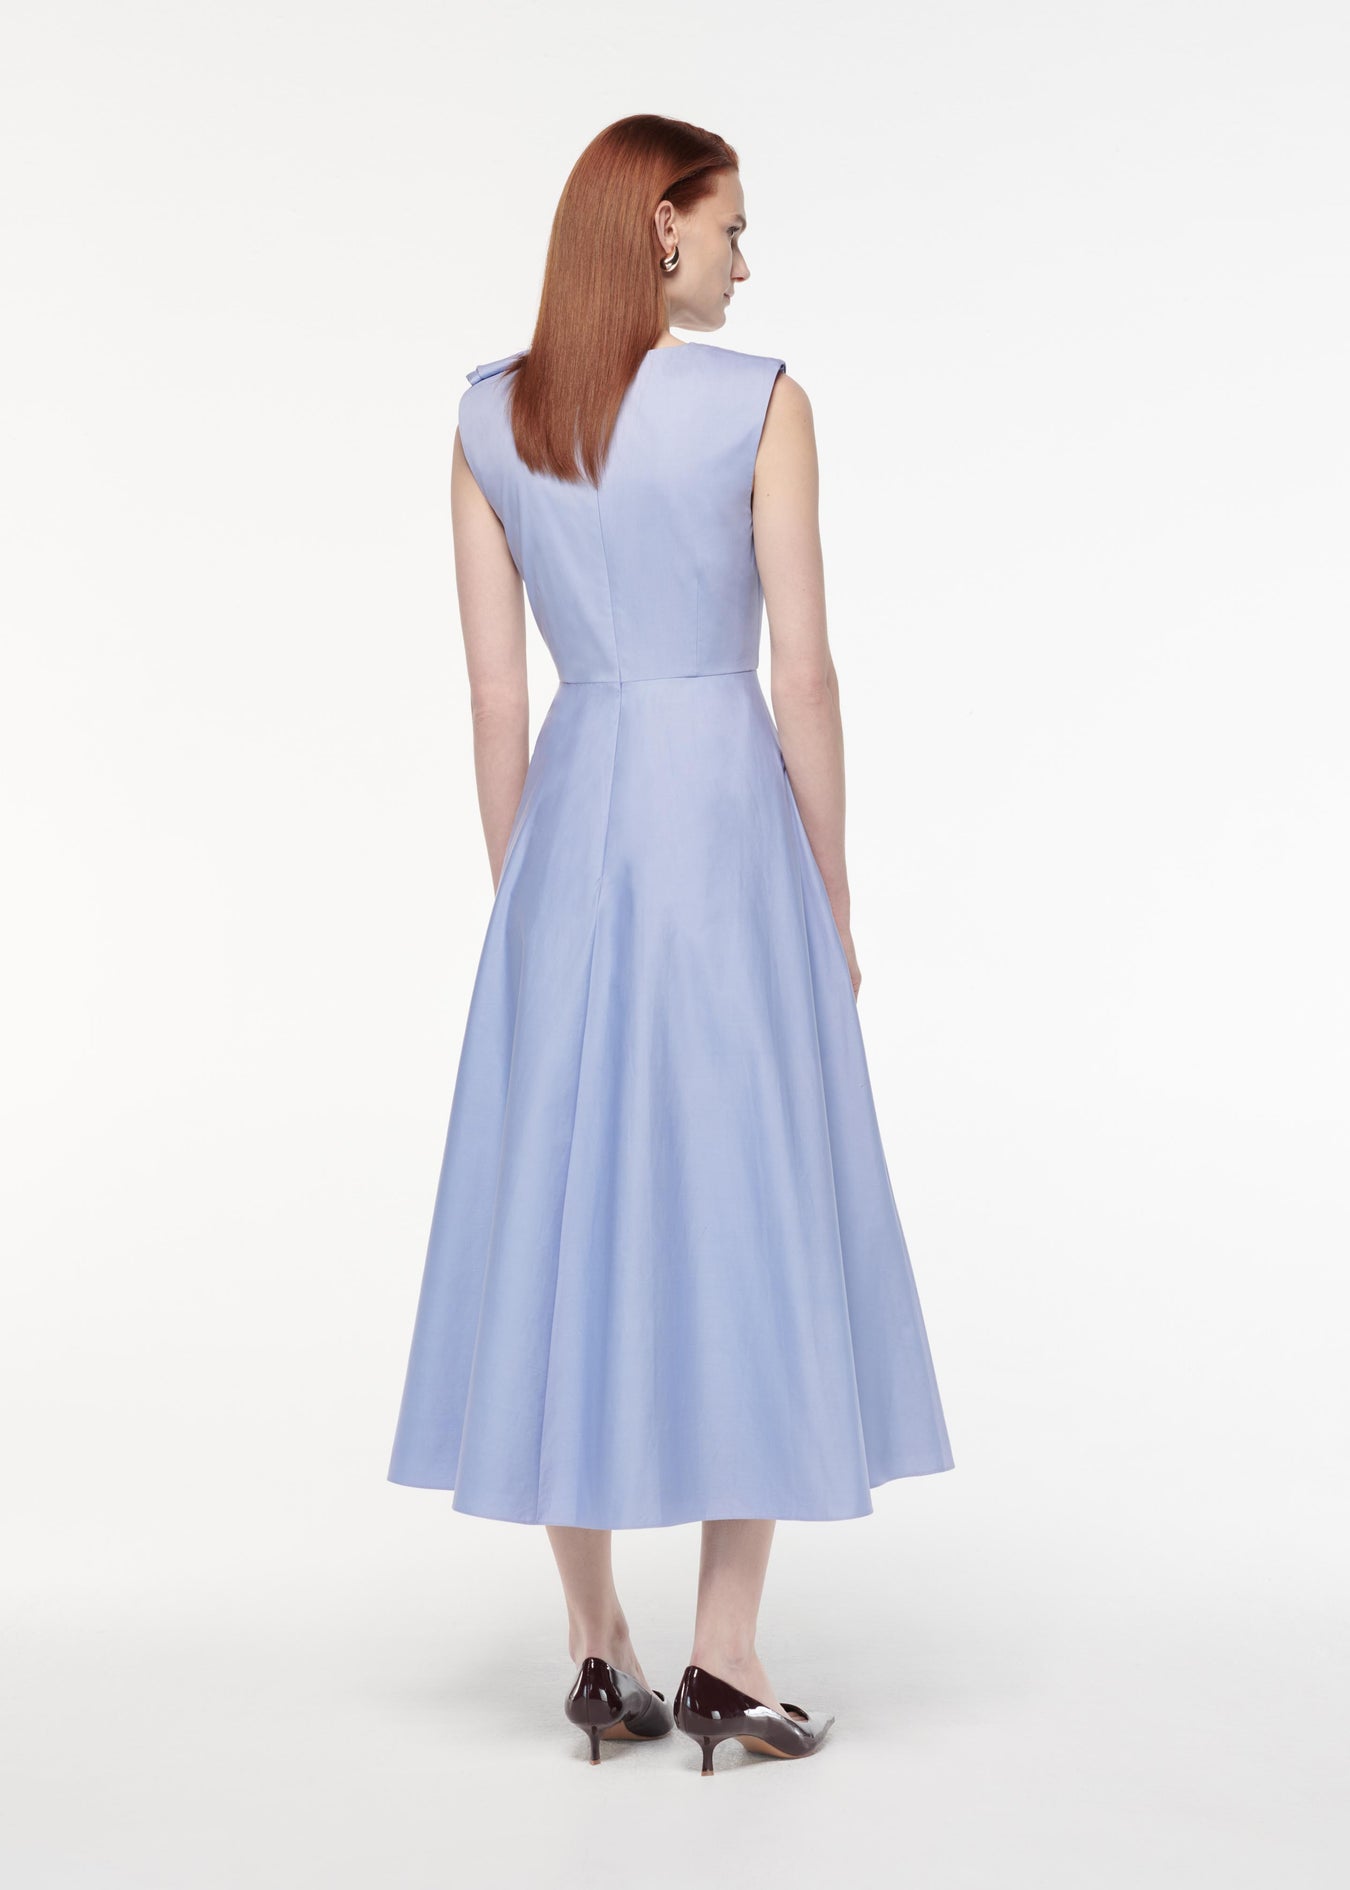 A photograph of a woman wearing a Bow Cotton Poplin Midi Dress in Blue